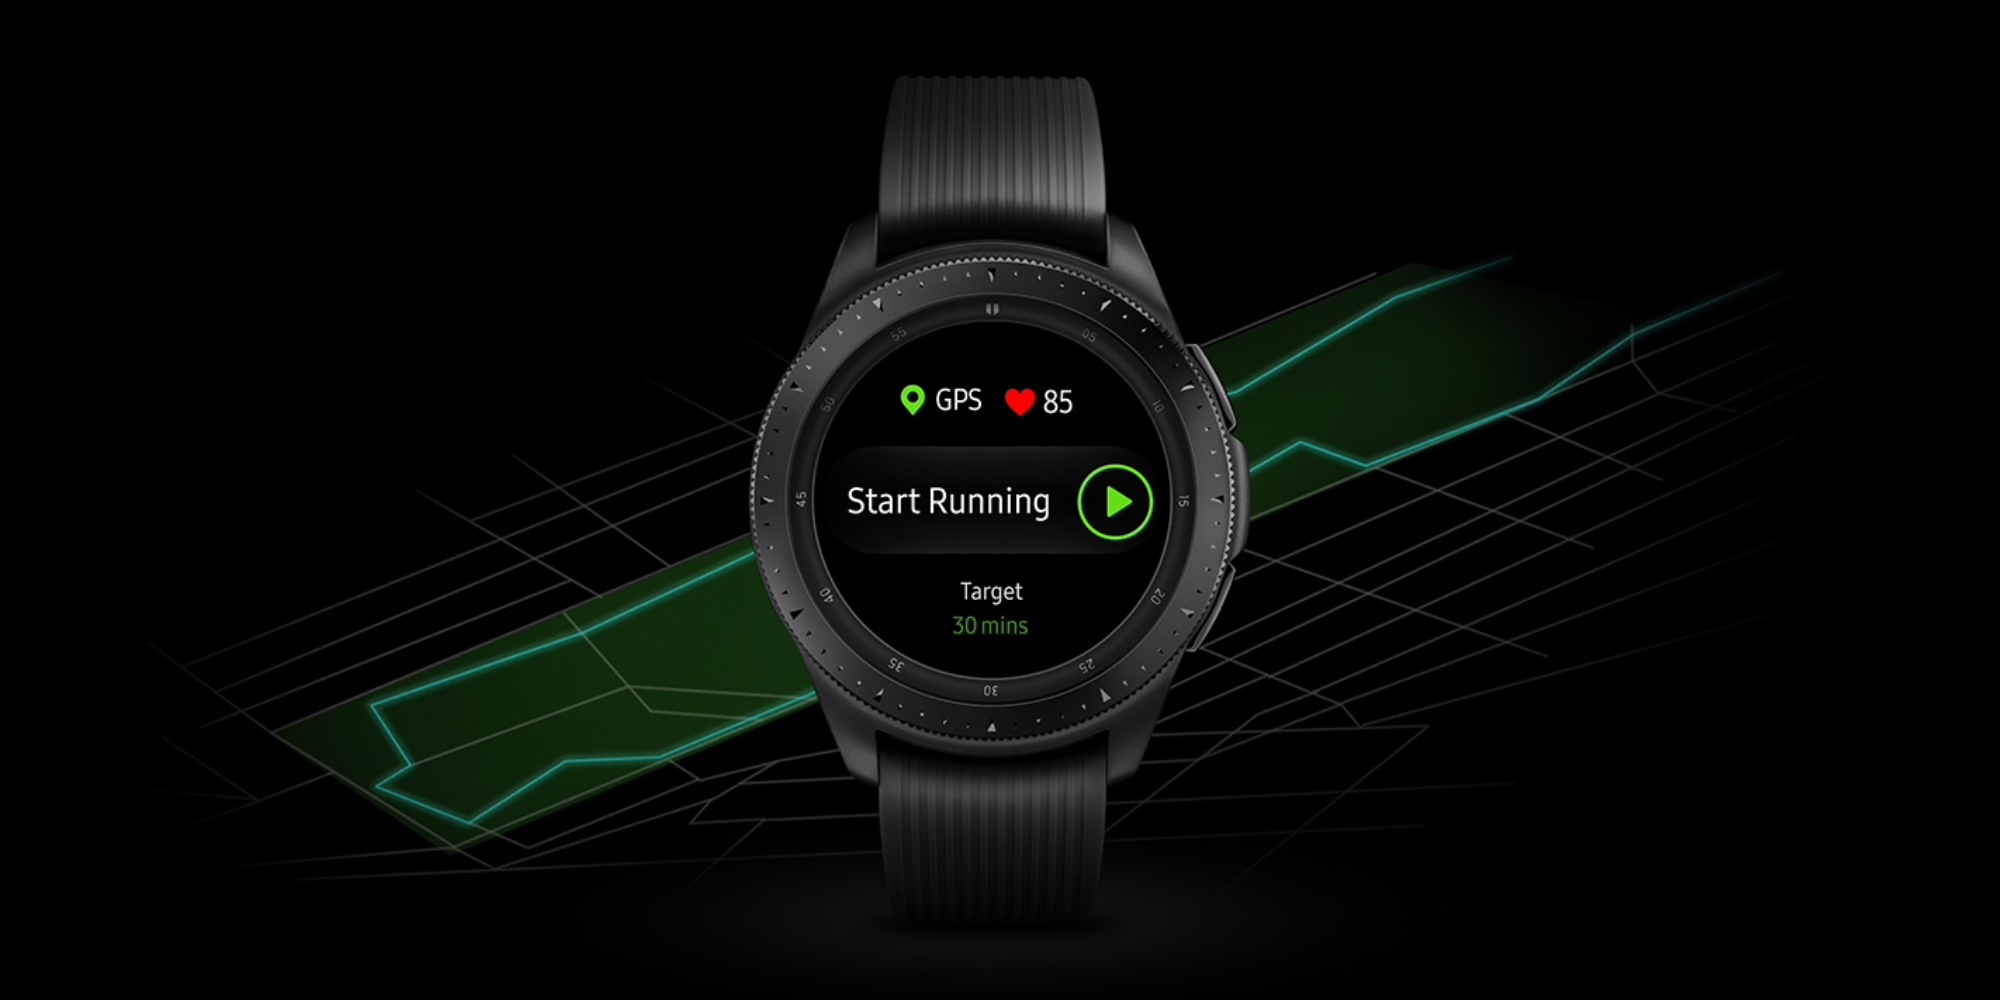 It’s already time to look forward to Samsung’s next smartwatch.Samsung Galaxy Watch 2 release date.Given Samsung launched the Gear Sport in August and the Galaxy Watch in August 